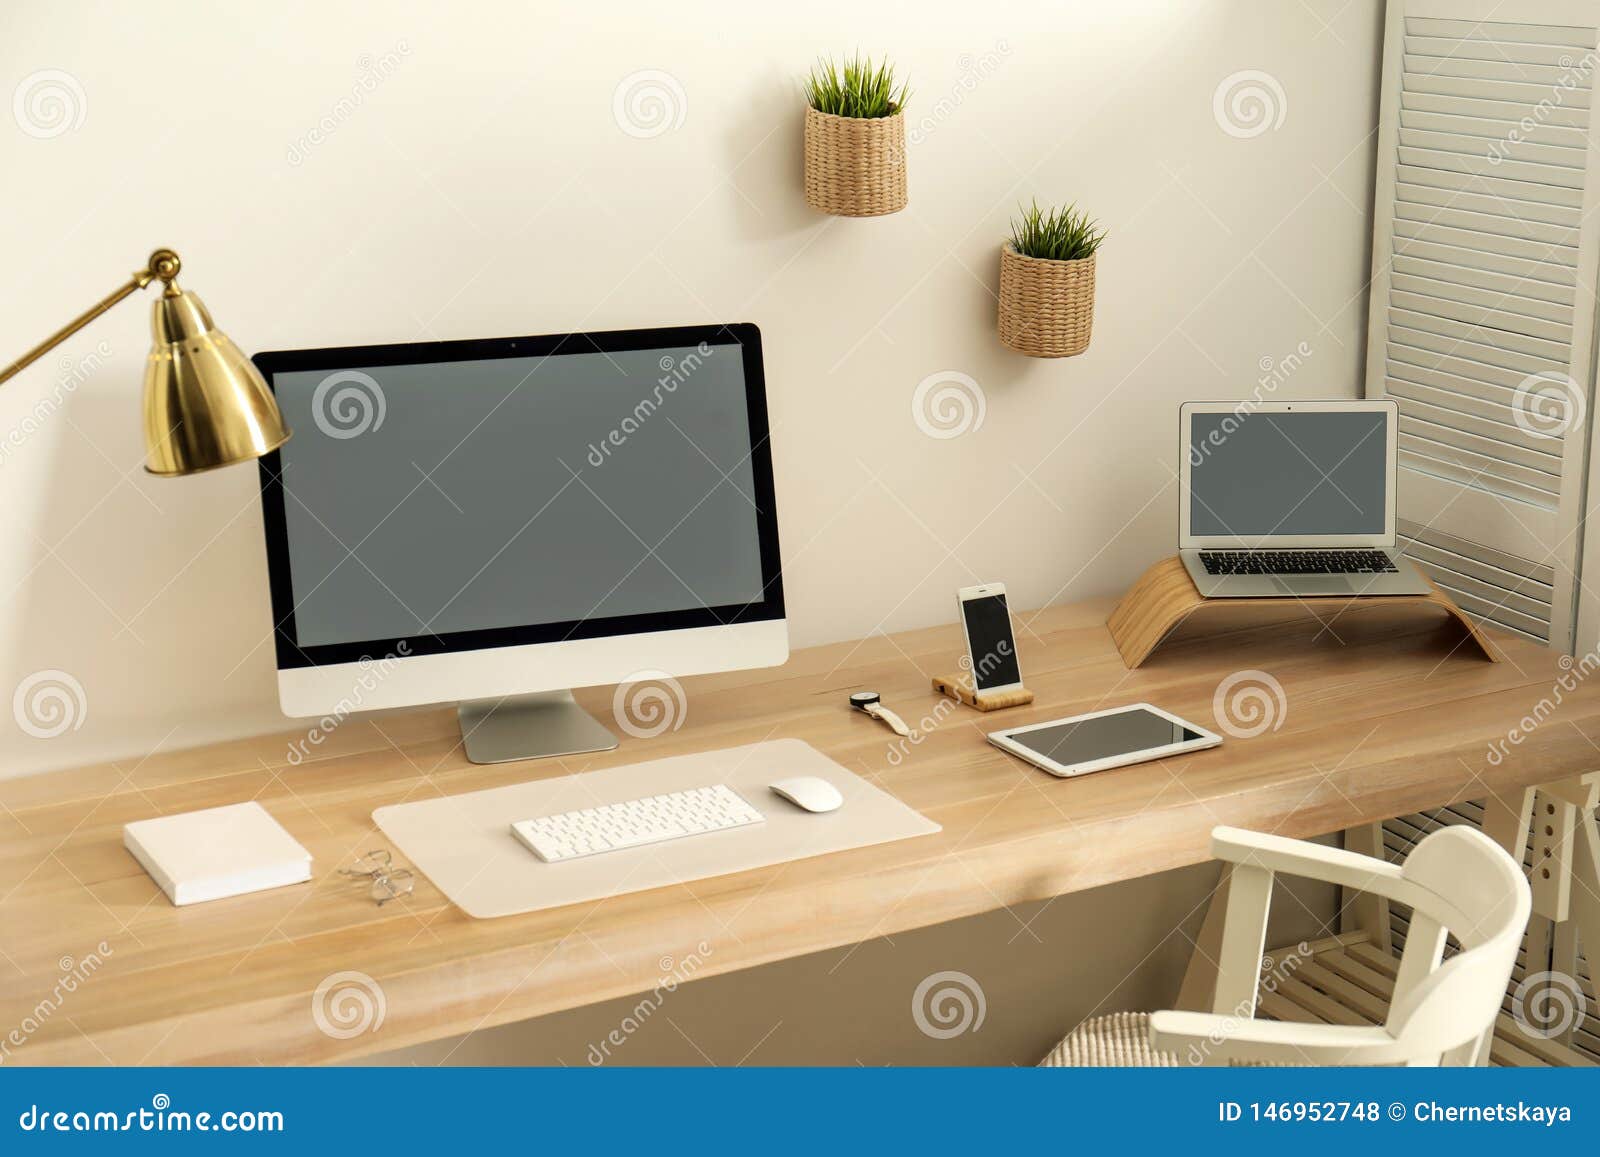 Stylish Workplace Interior with Modern Computer. Mockup for Design ...